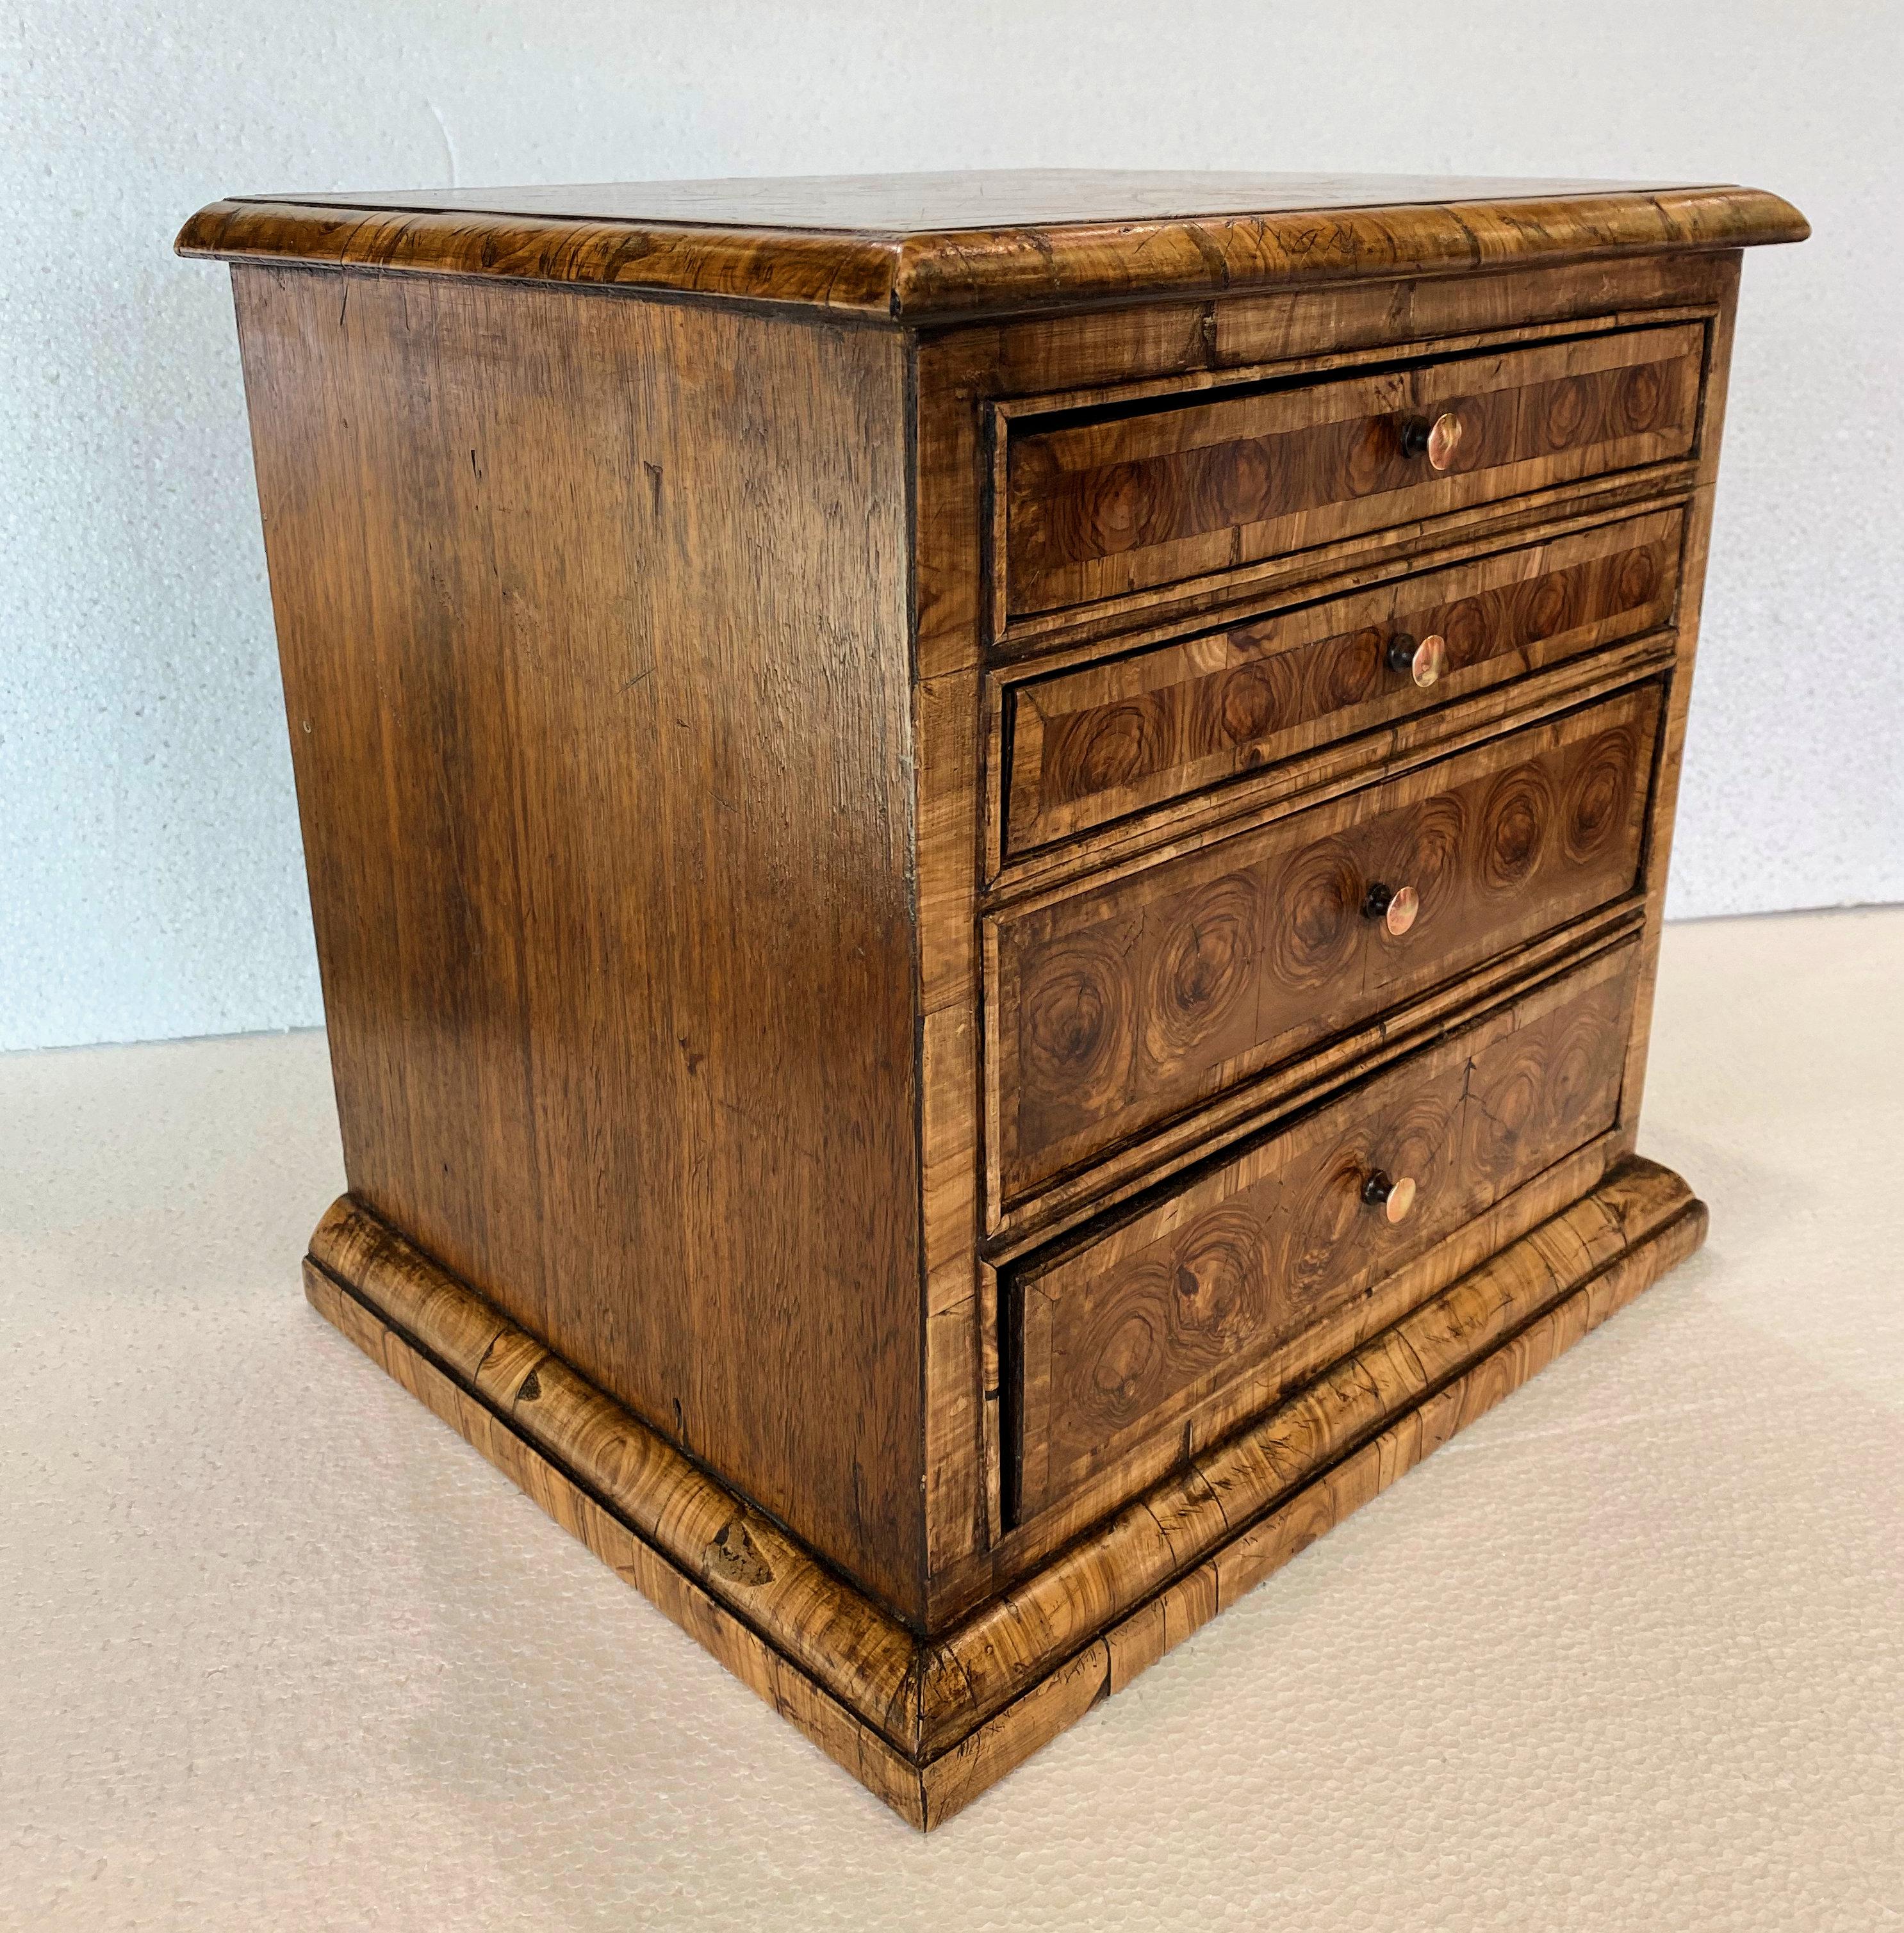 This small Victorian collector's chest has been recently sympathetically re-veneered over the original Victorian oak frame. This lovely chest has 4 graduating drawers with an exquisite olive oyster veneer on the top and drawers. The top features a